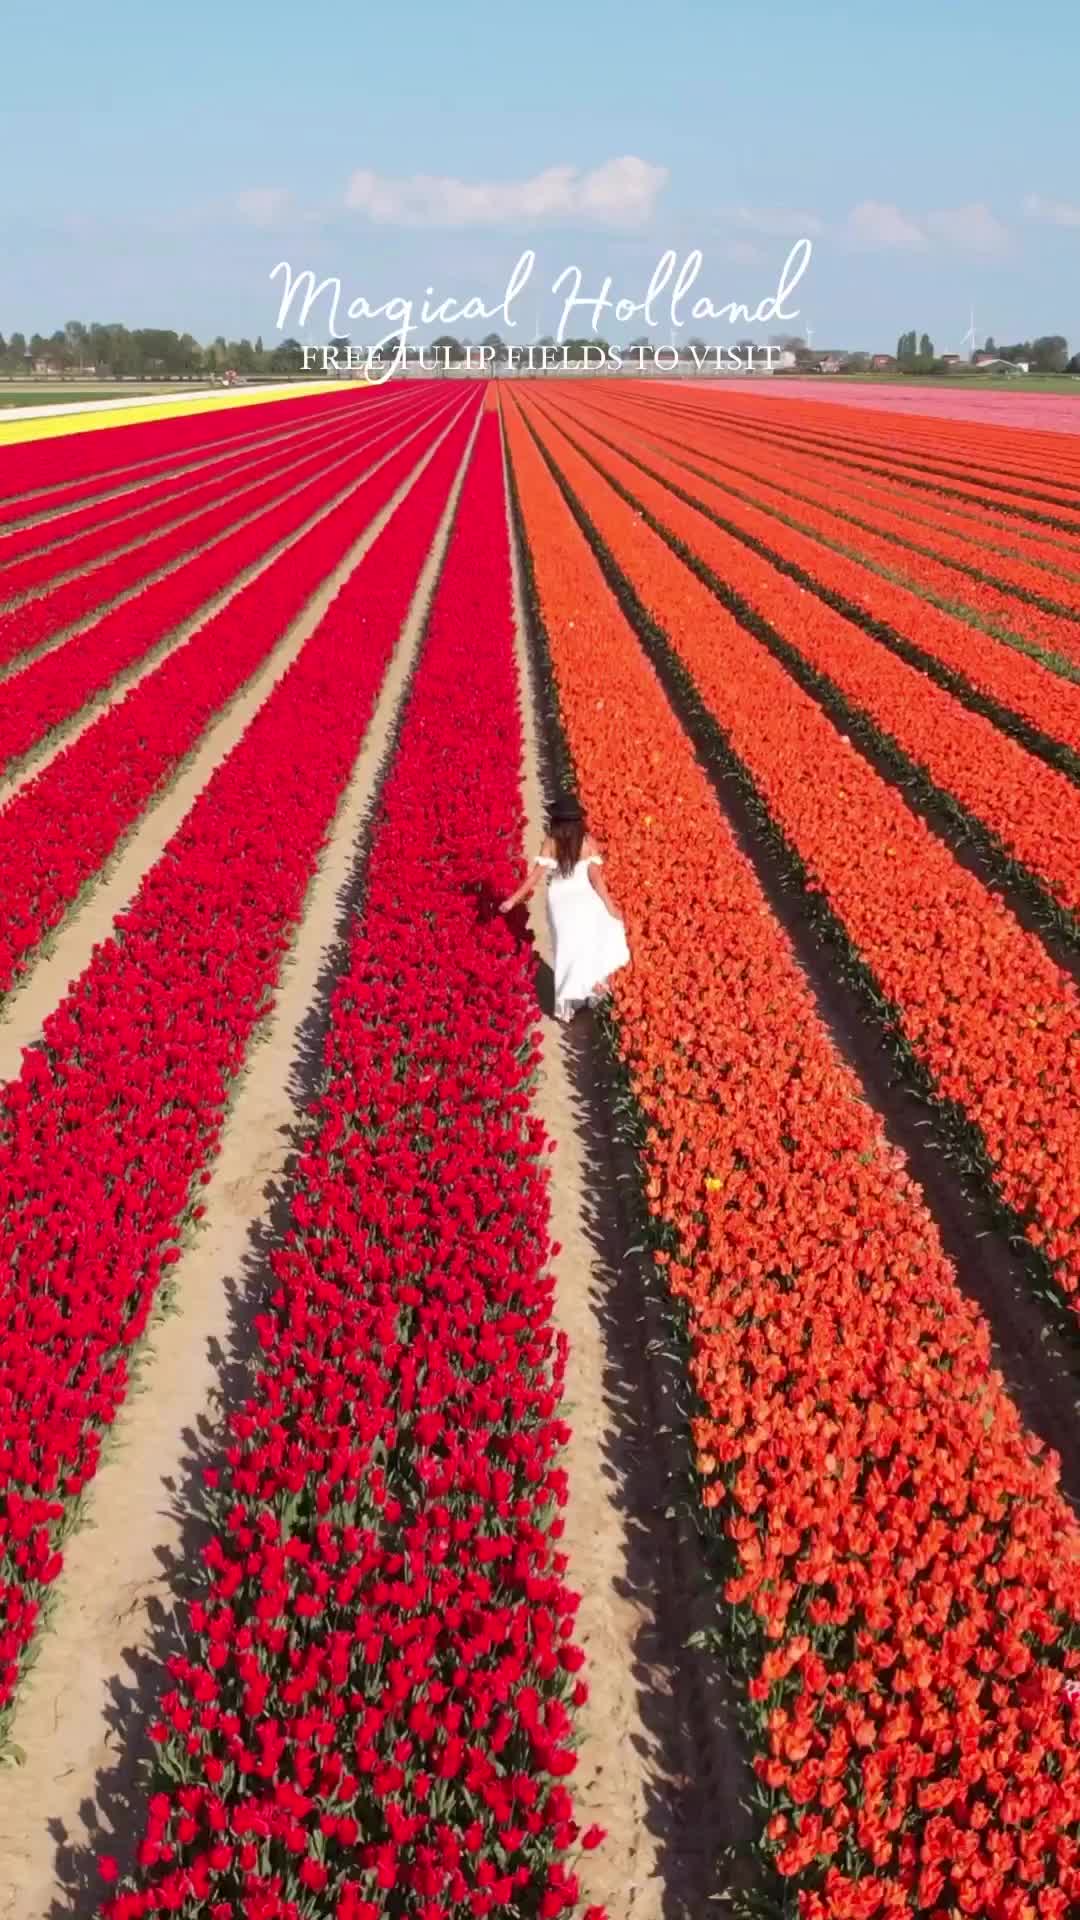 Best Free Places to See Tulips in Netherlands